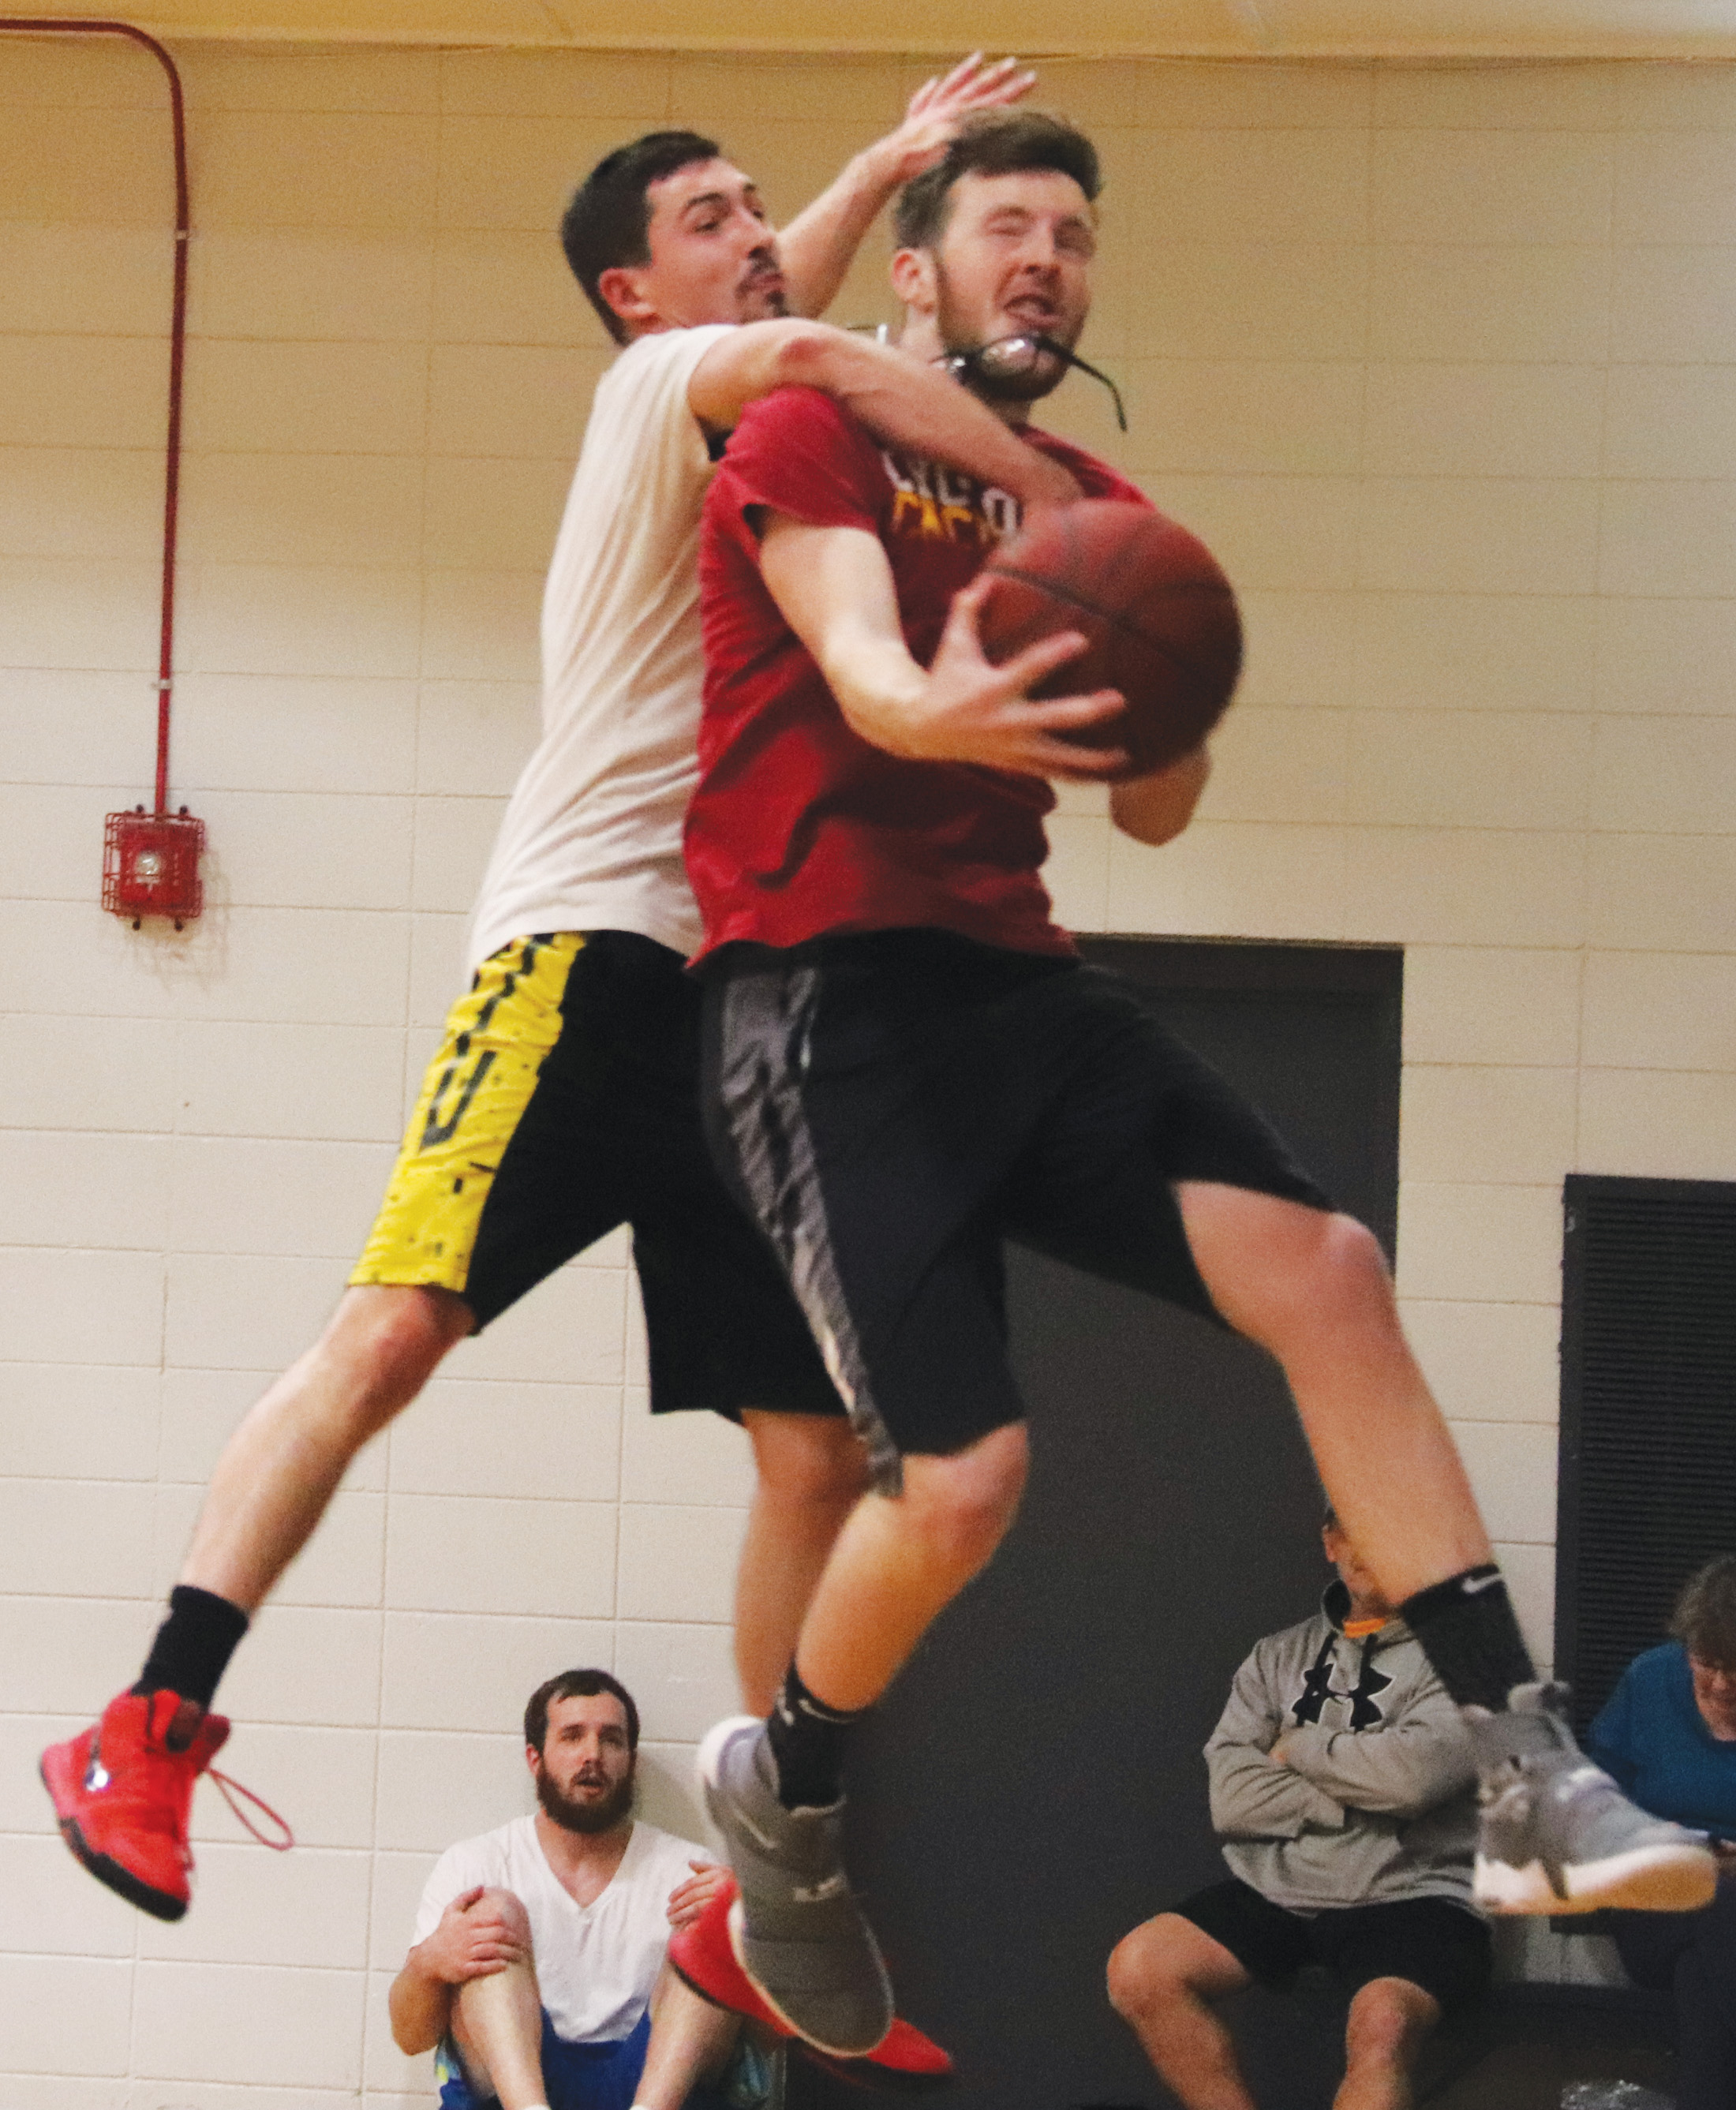 No easy layups in adult 5-on-5 basketball league